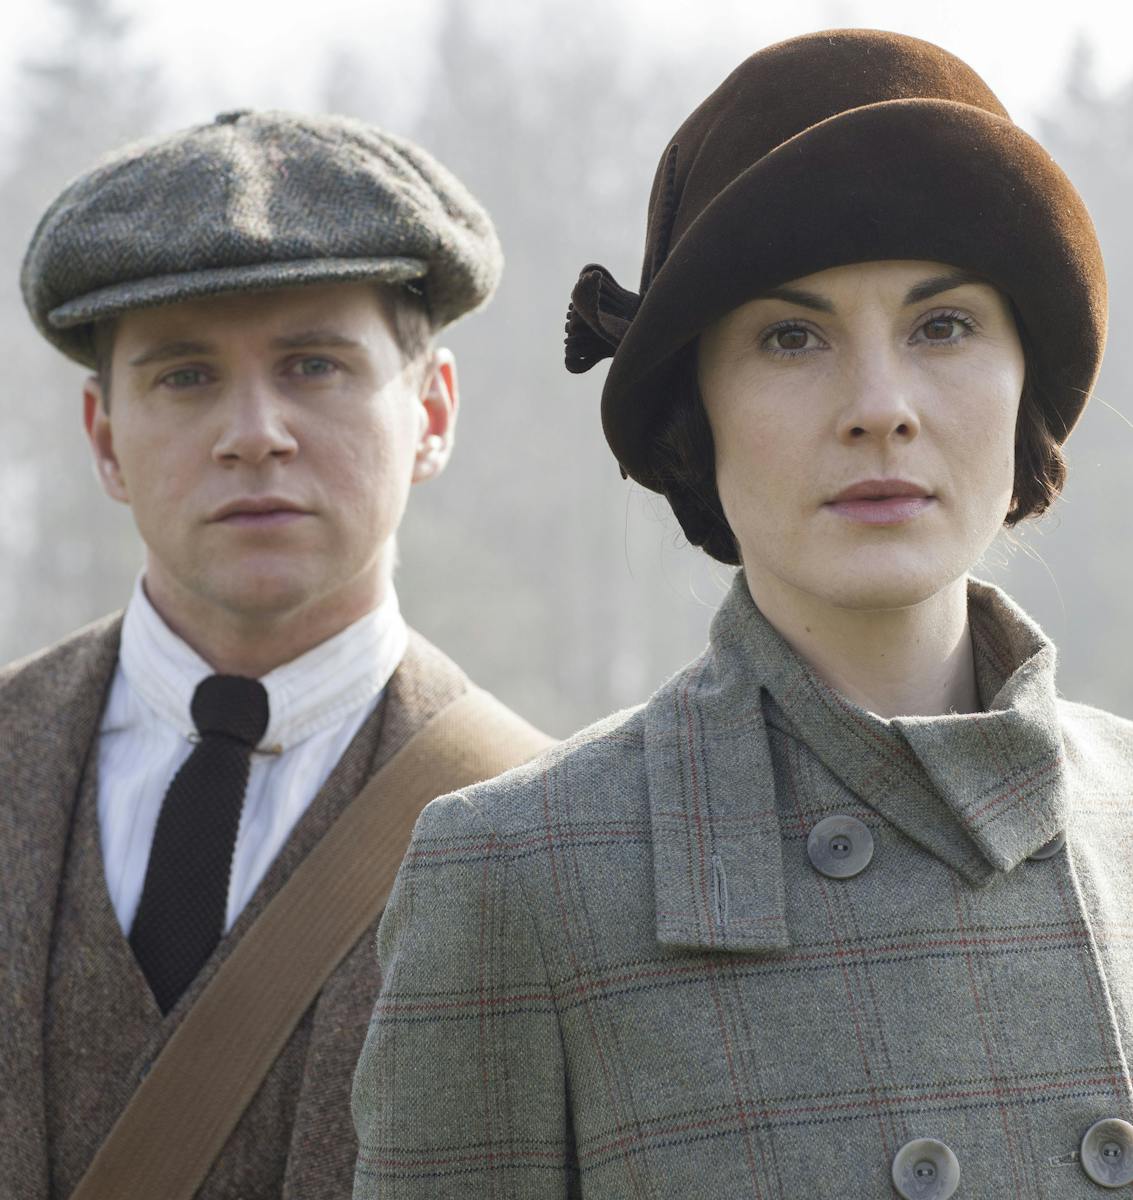 Downton Abbey, Season 5 MASTERPIECE on PBS Sundays, January 4 - March 1, 2015 at 9pm ET Episode 1 Shown from left to right: Allen Leech as Tom Branson